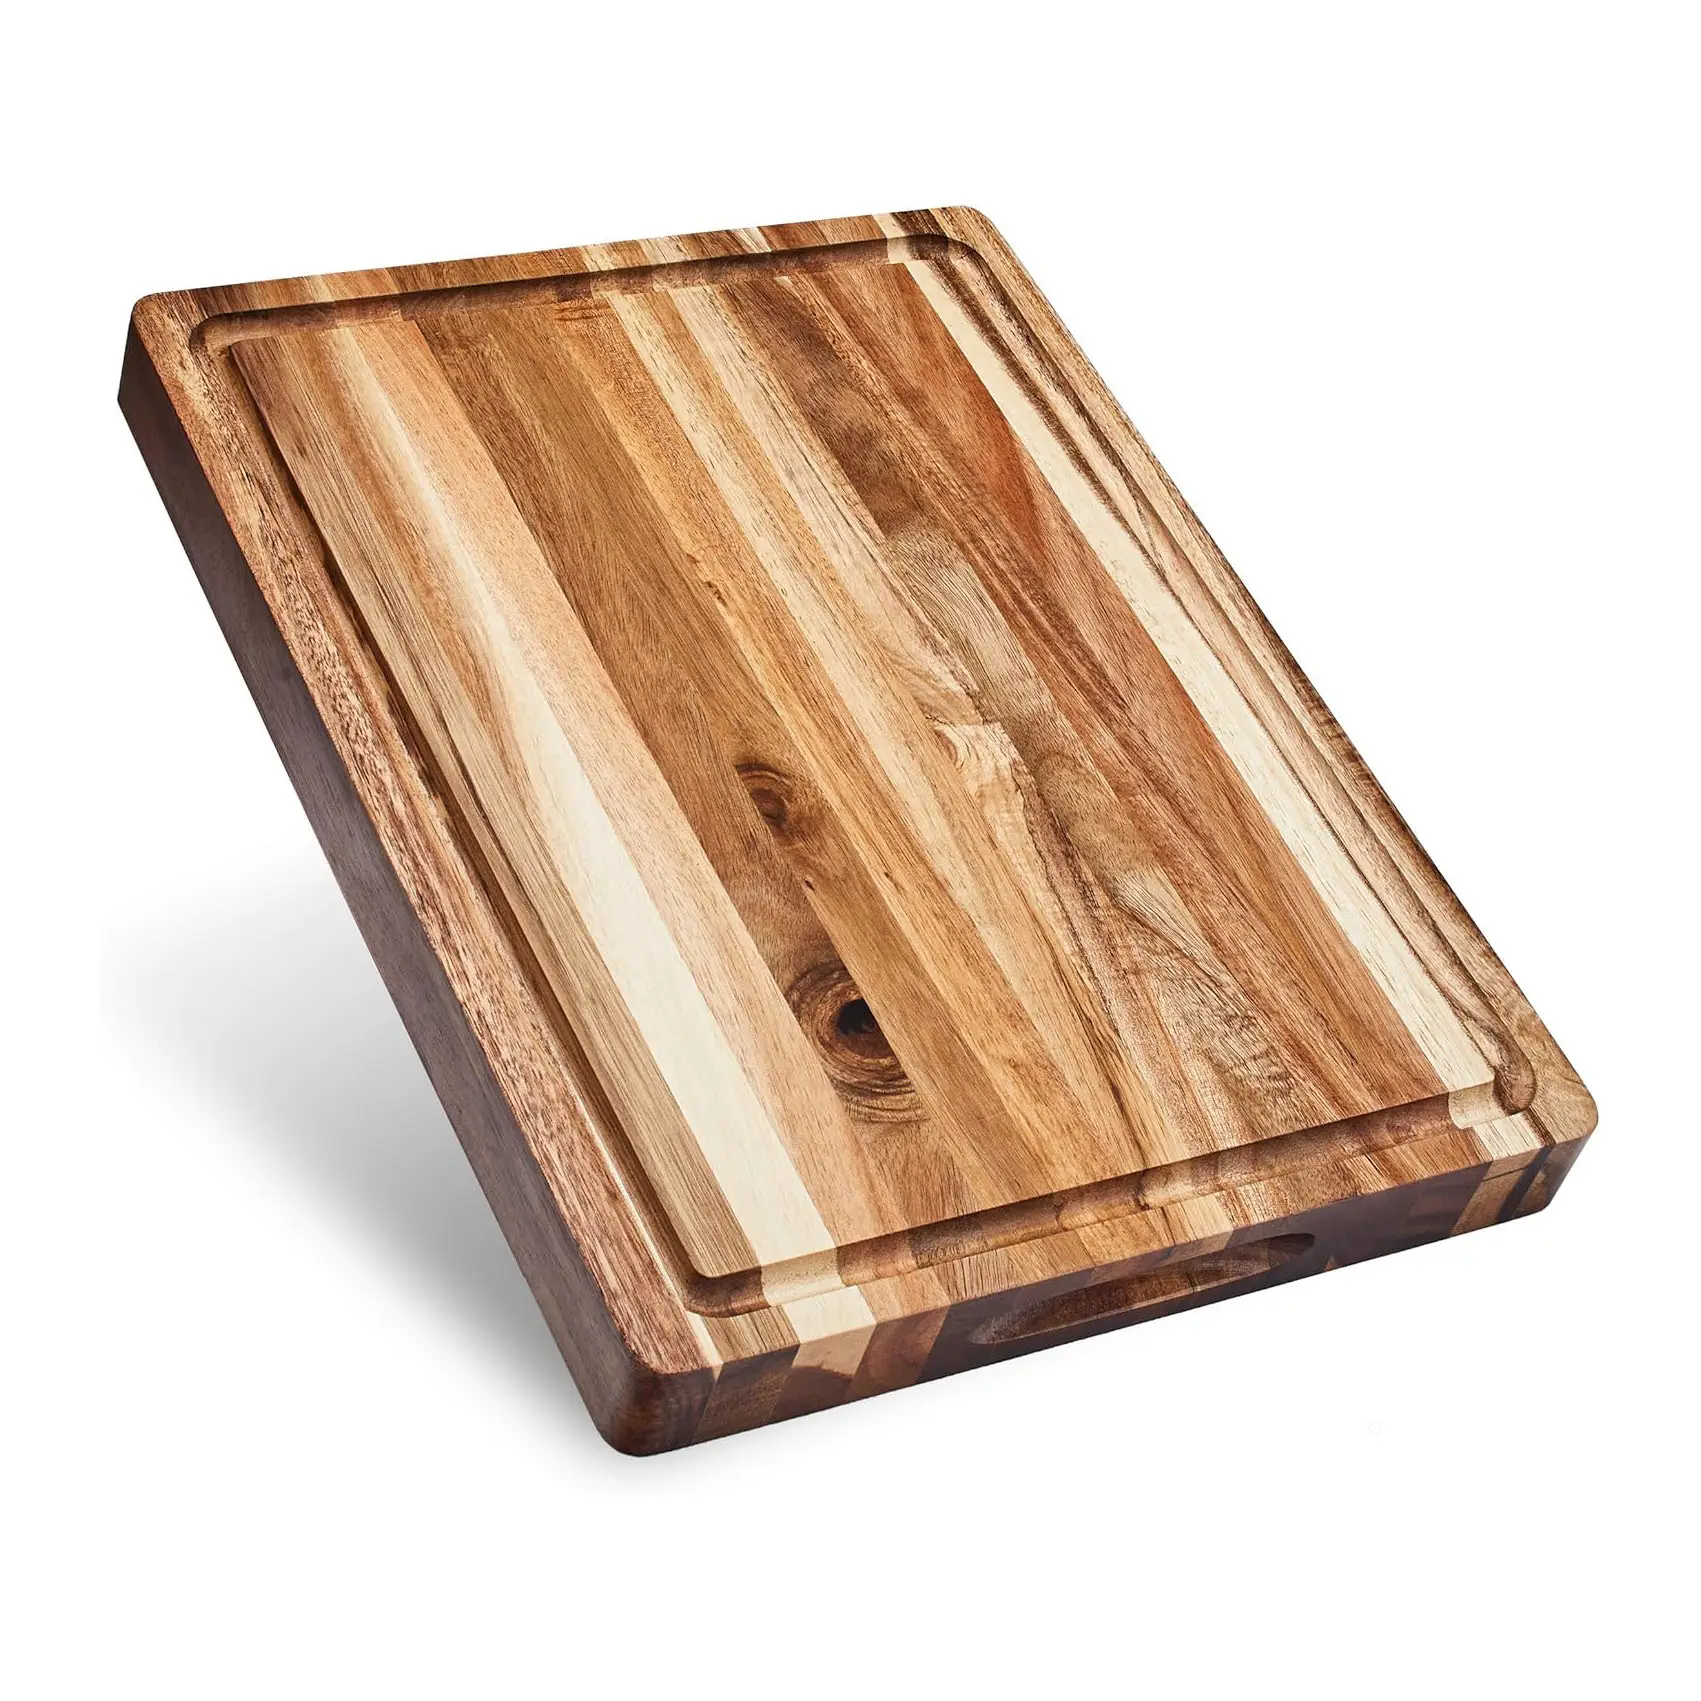 Thick Sustainable Acacia chopping board Wood Cutting Board for Kitchen with Juice Groove Sorting Compartment